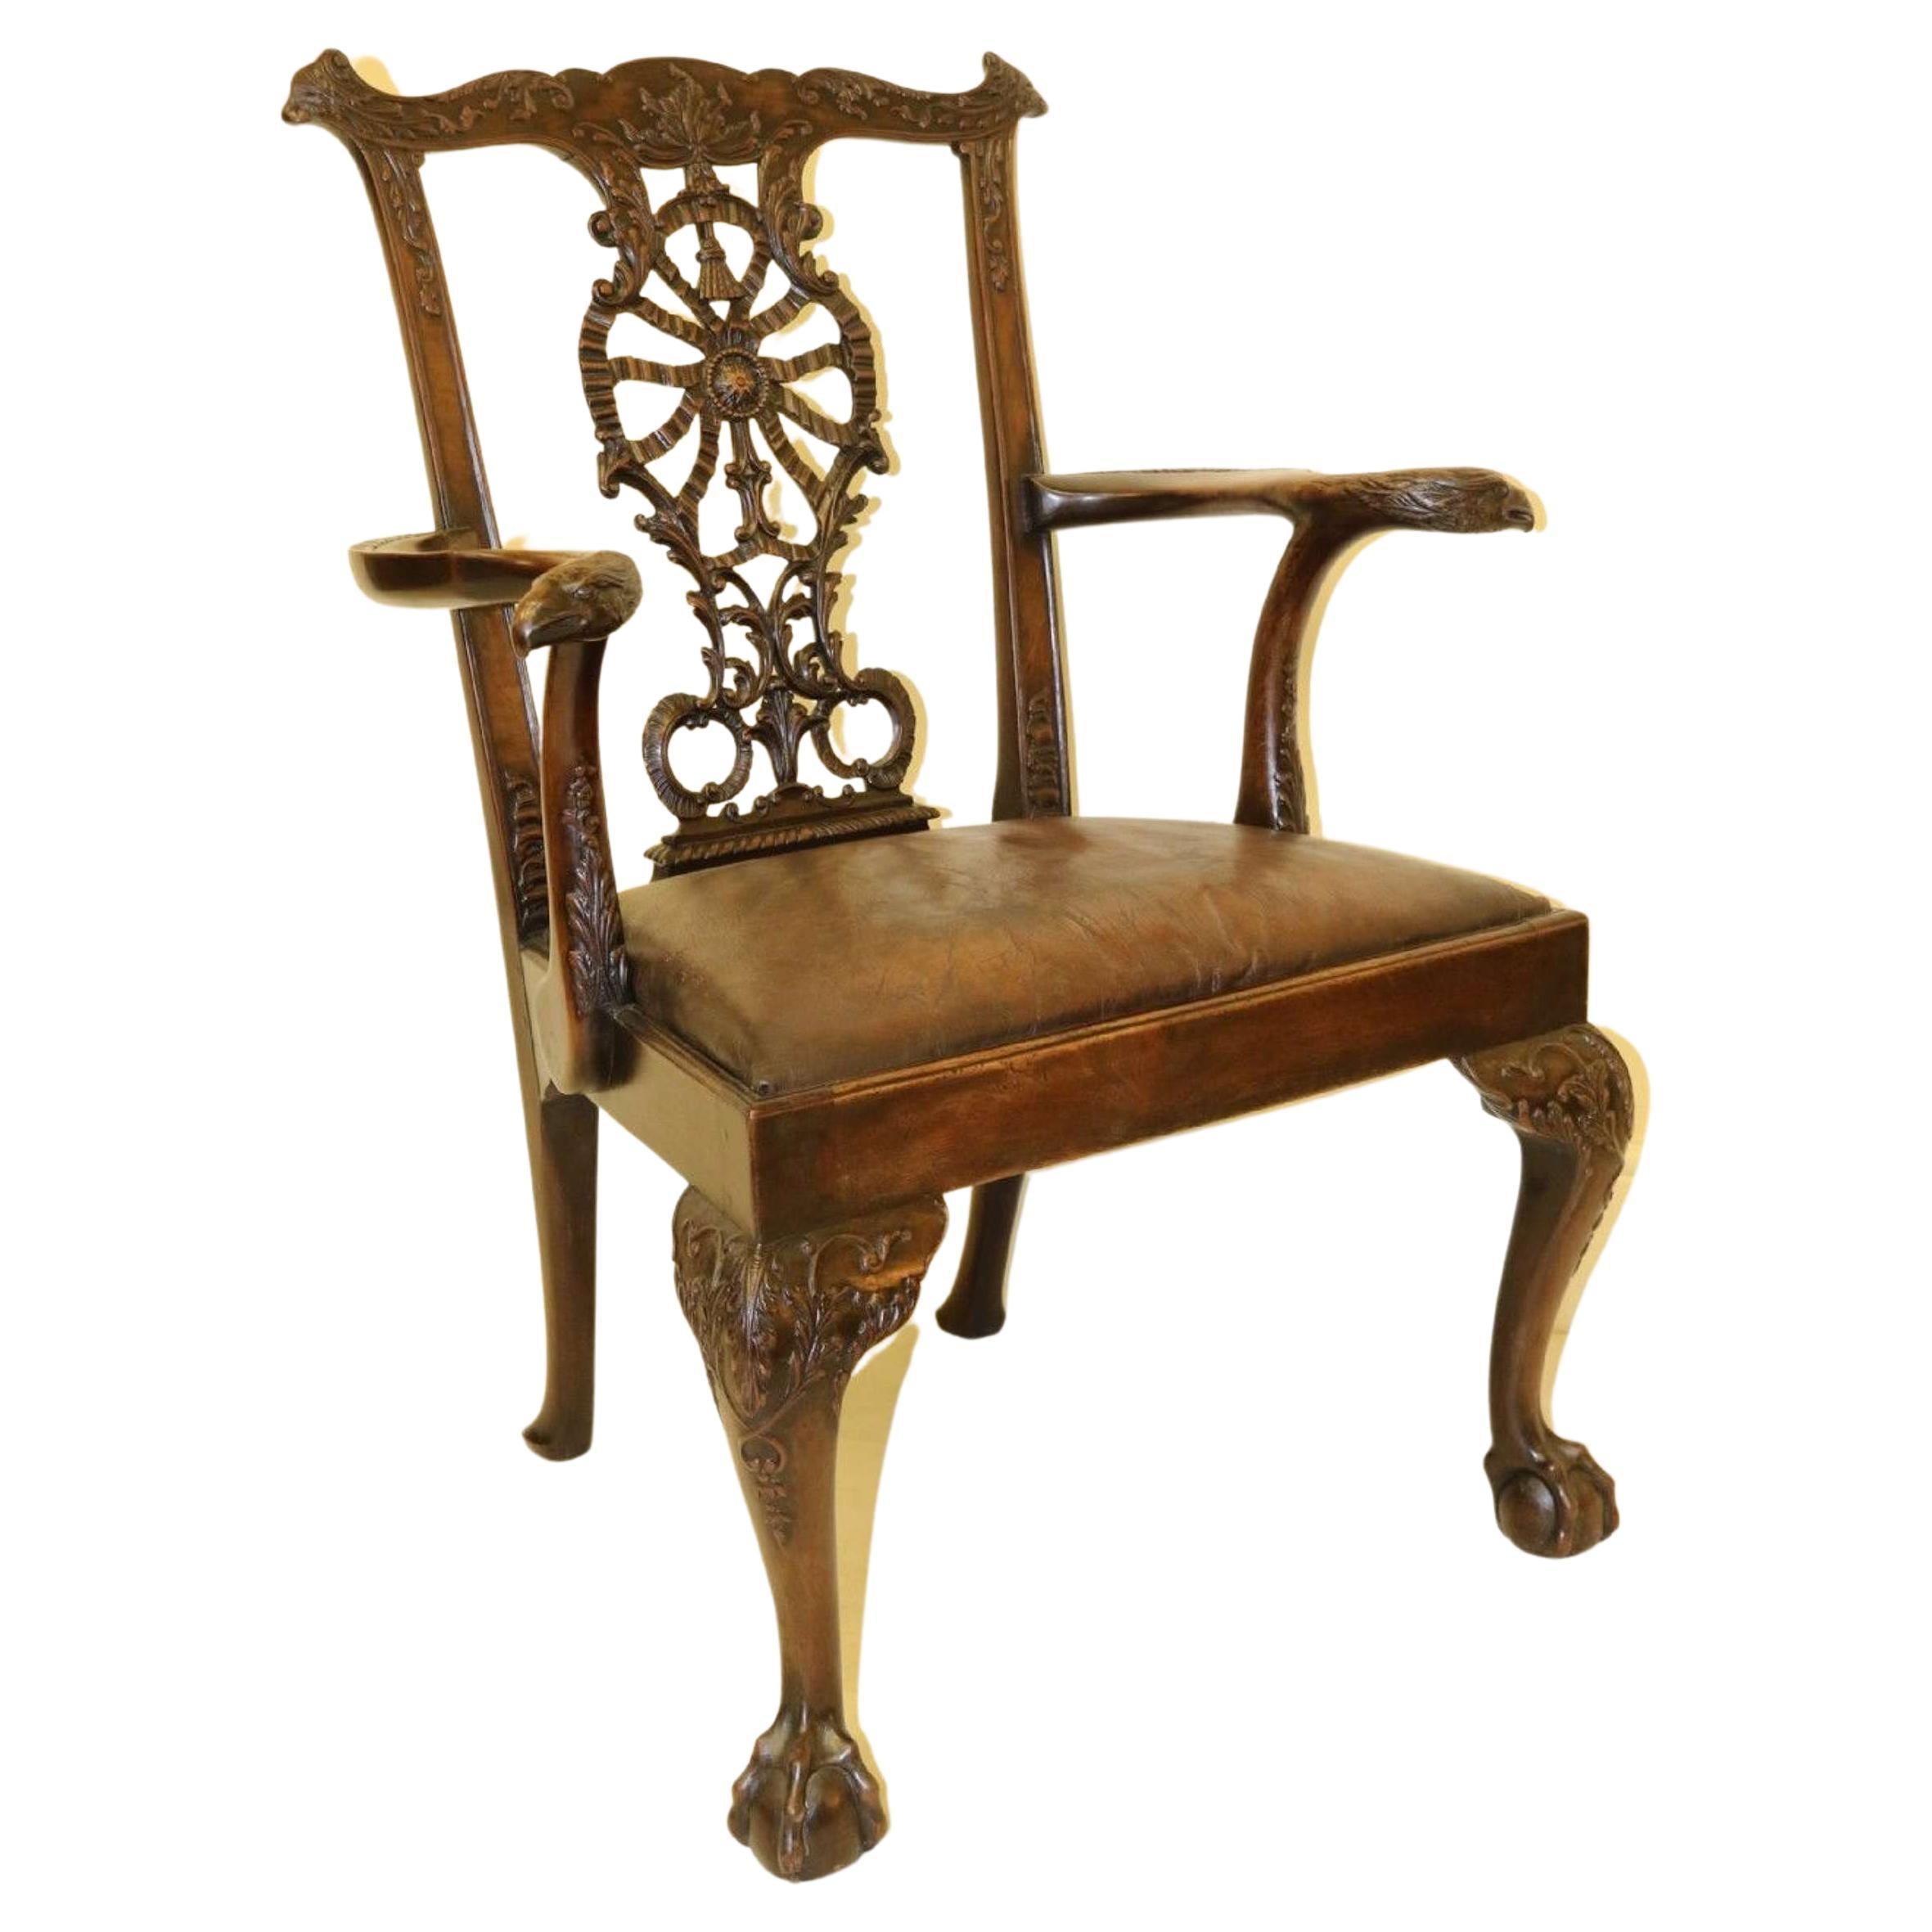 A Fine 19th Century Chippendale Style Armchair